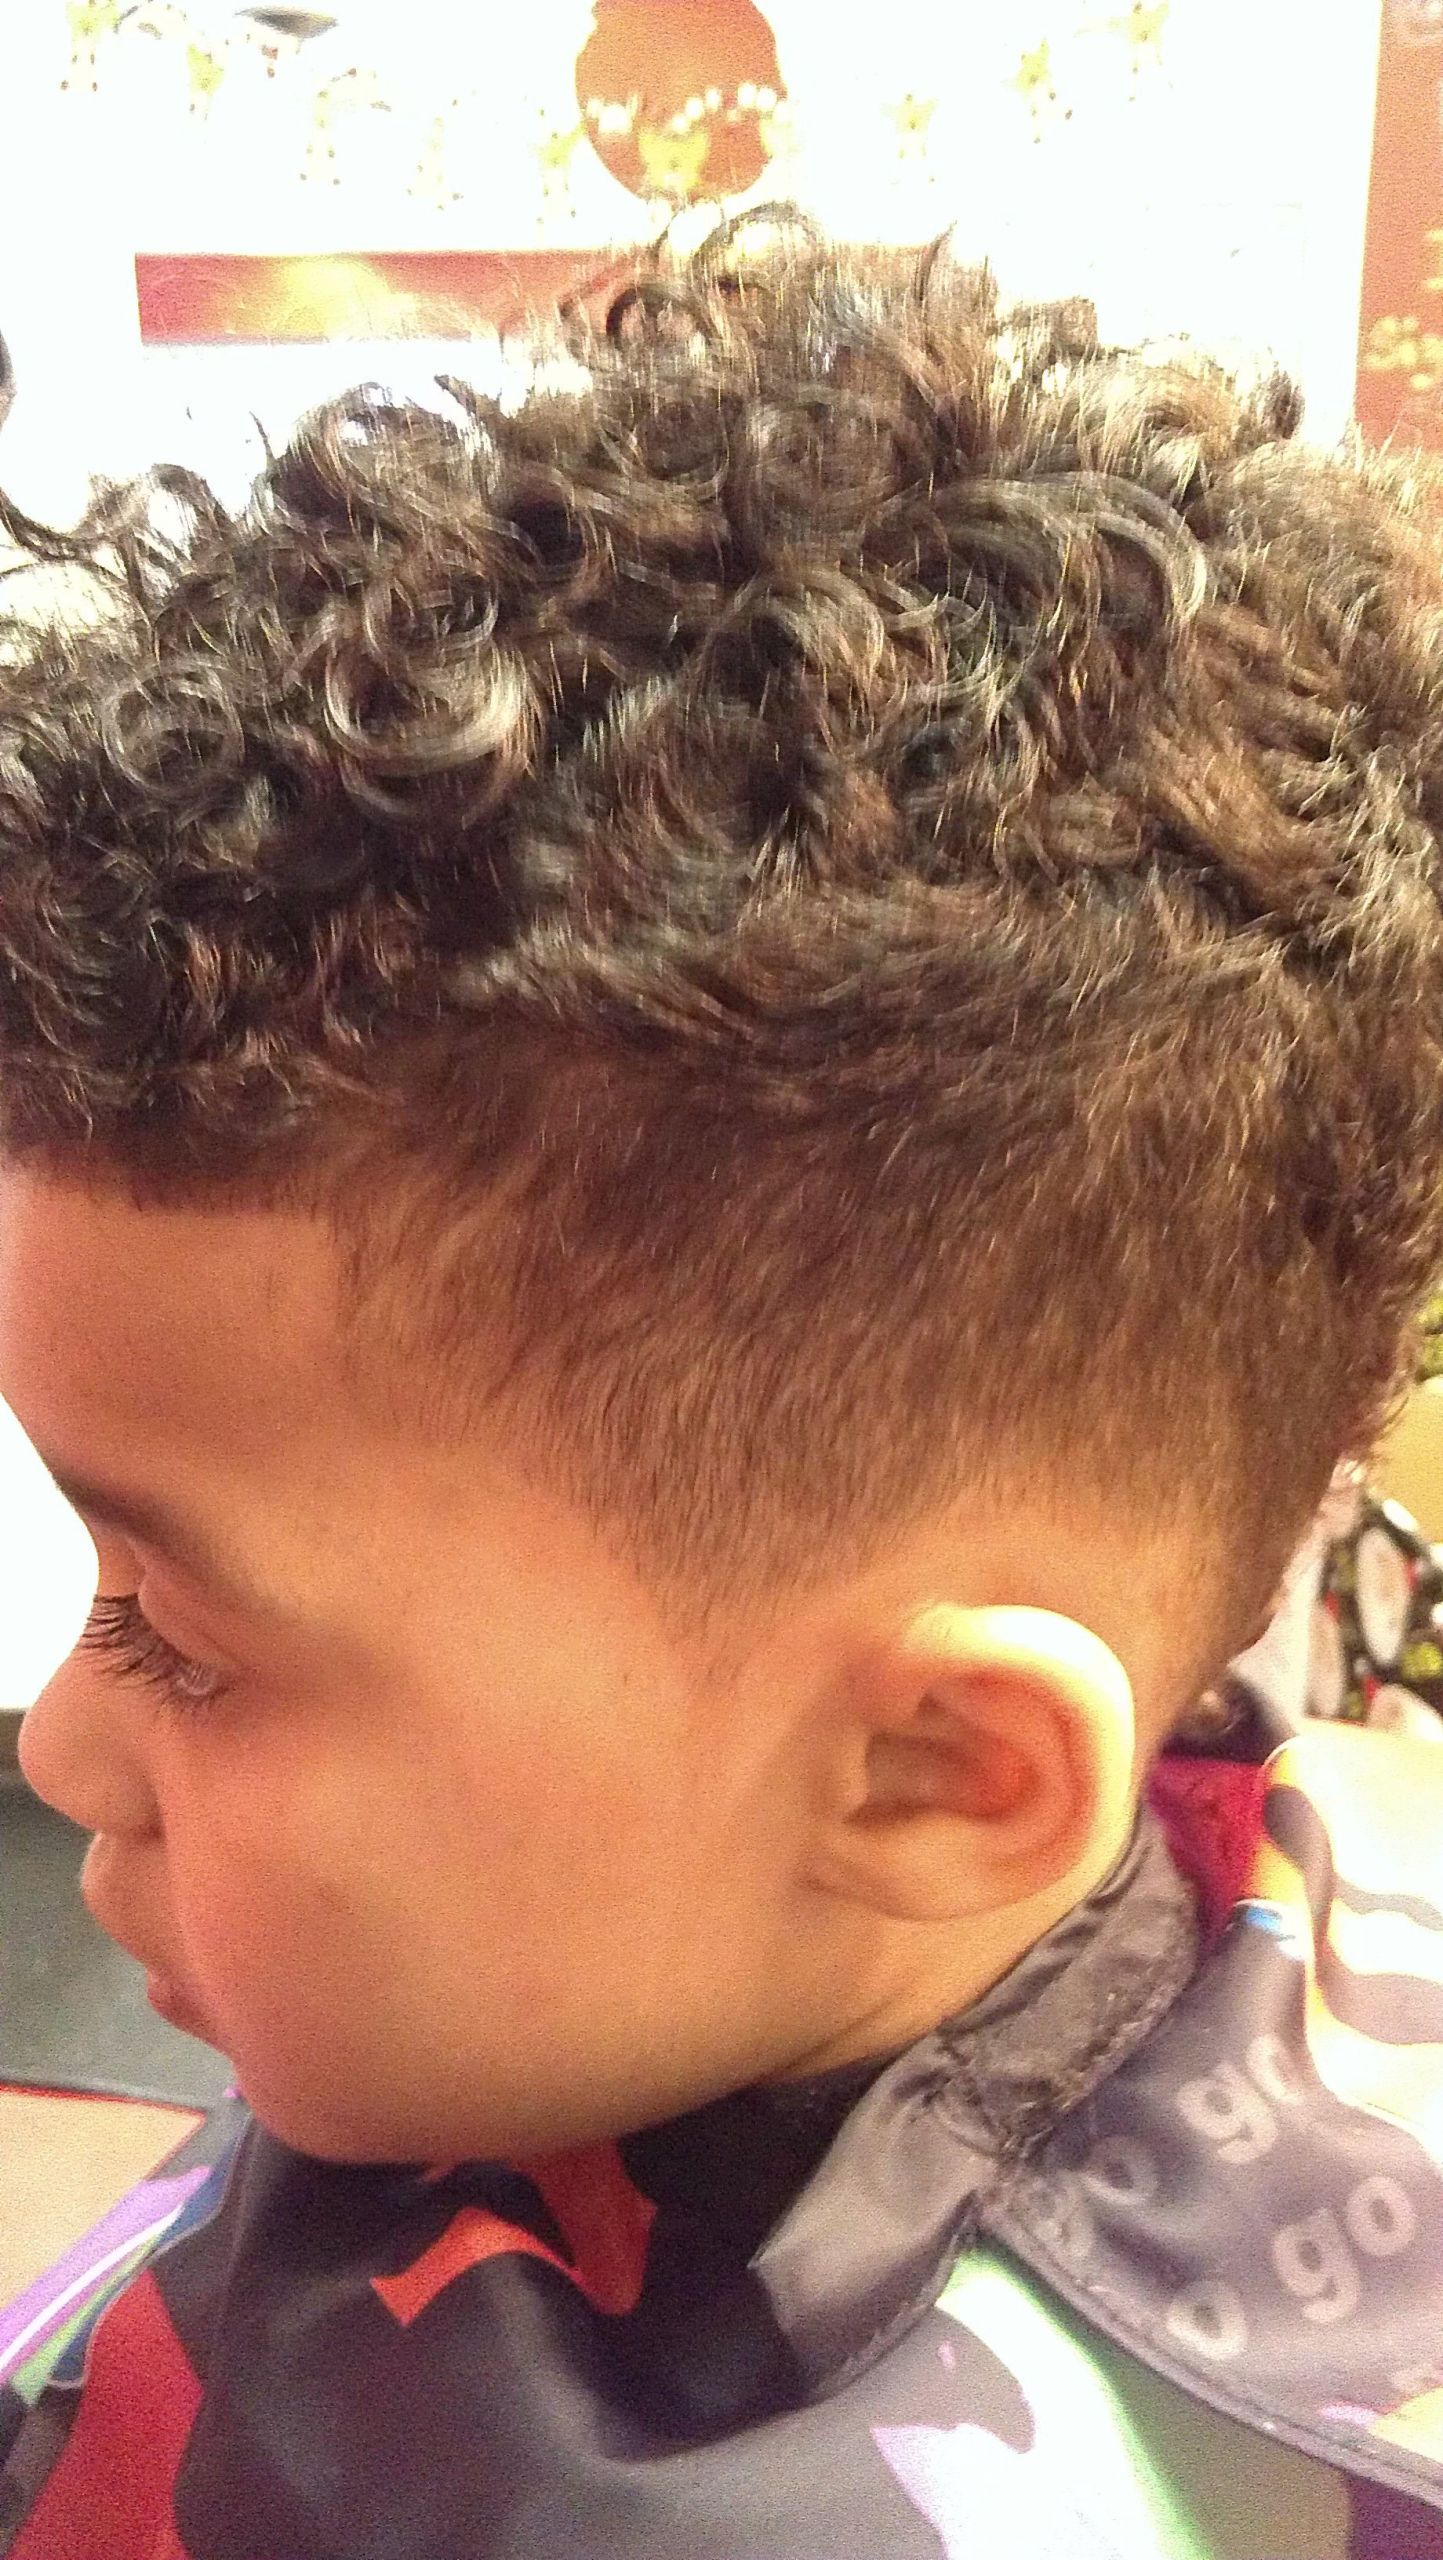 Mixed Kids Haircuts
 Curly MoHawk I want this on my sons curly hair